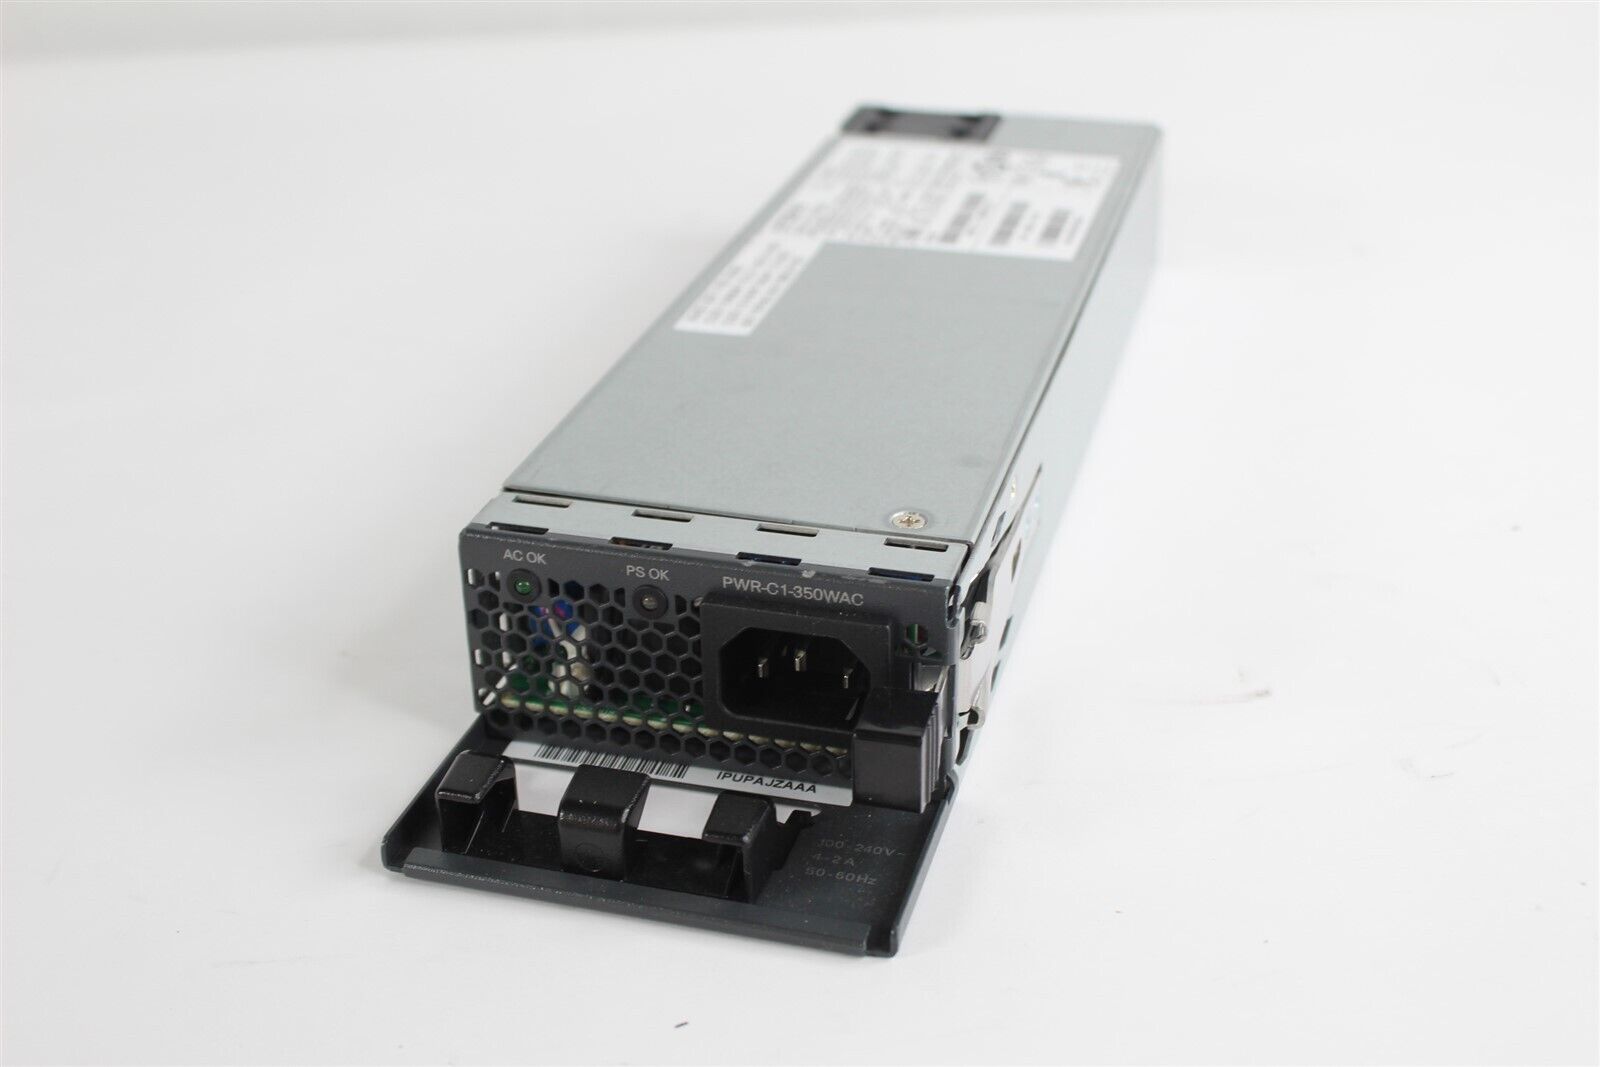 Cisco PWR-C1-350WAC Power Supply Module for Cisco 3850 Series Switch